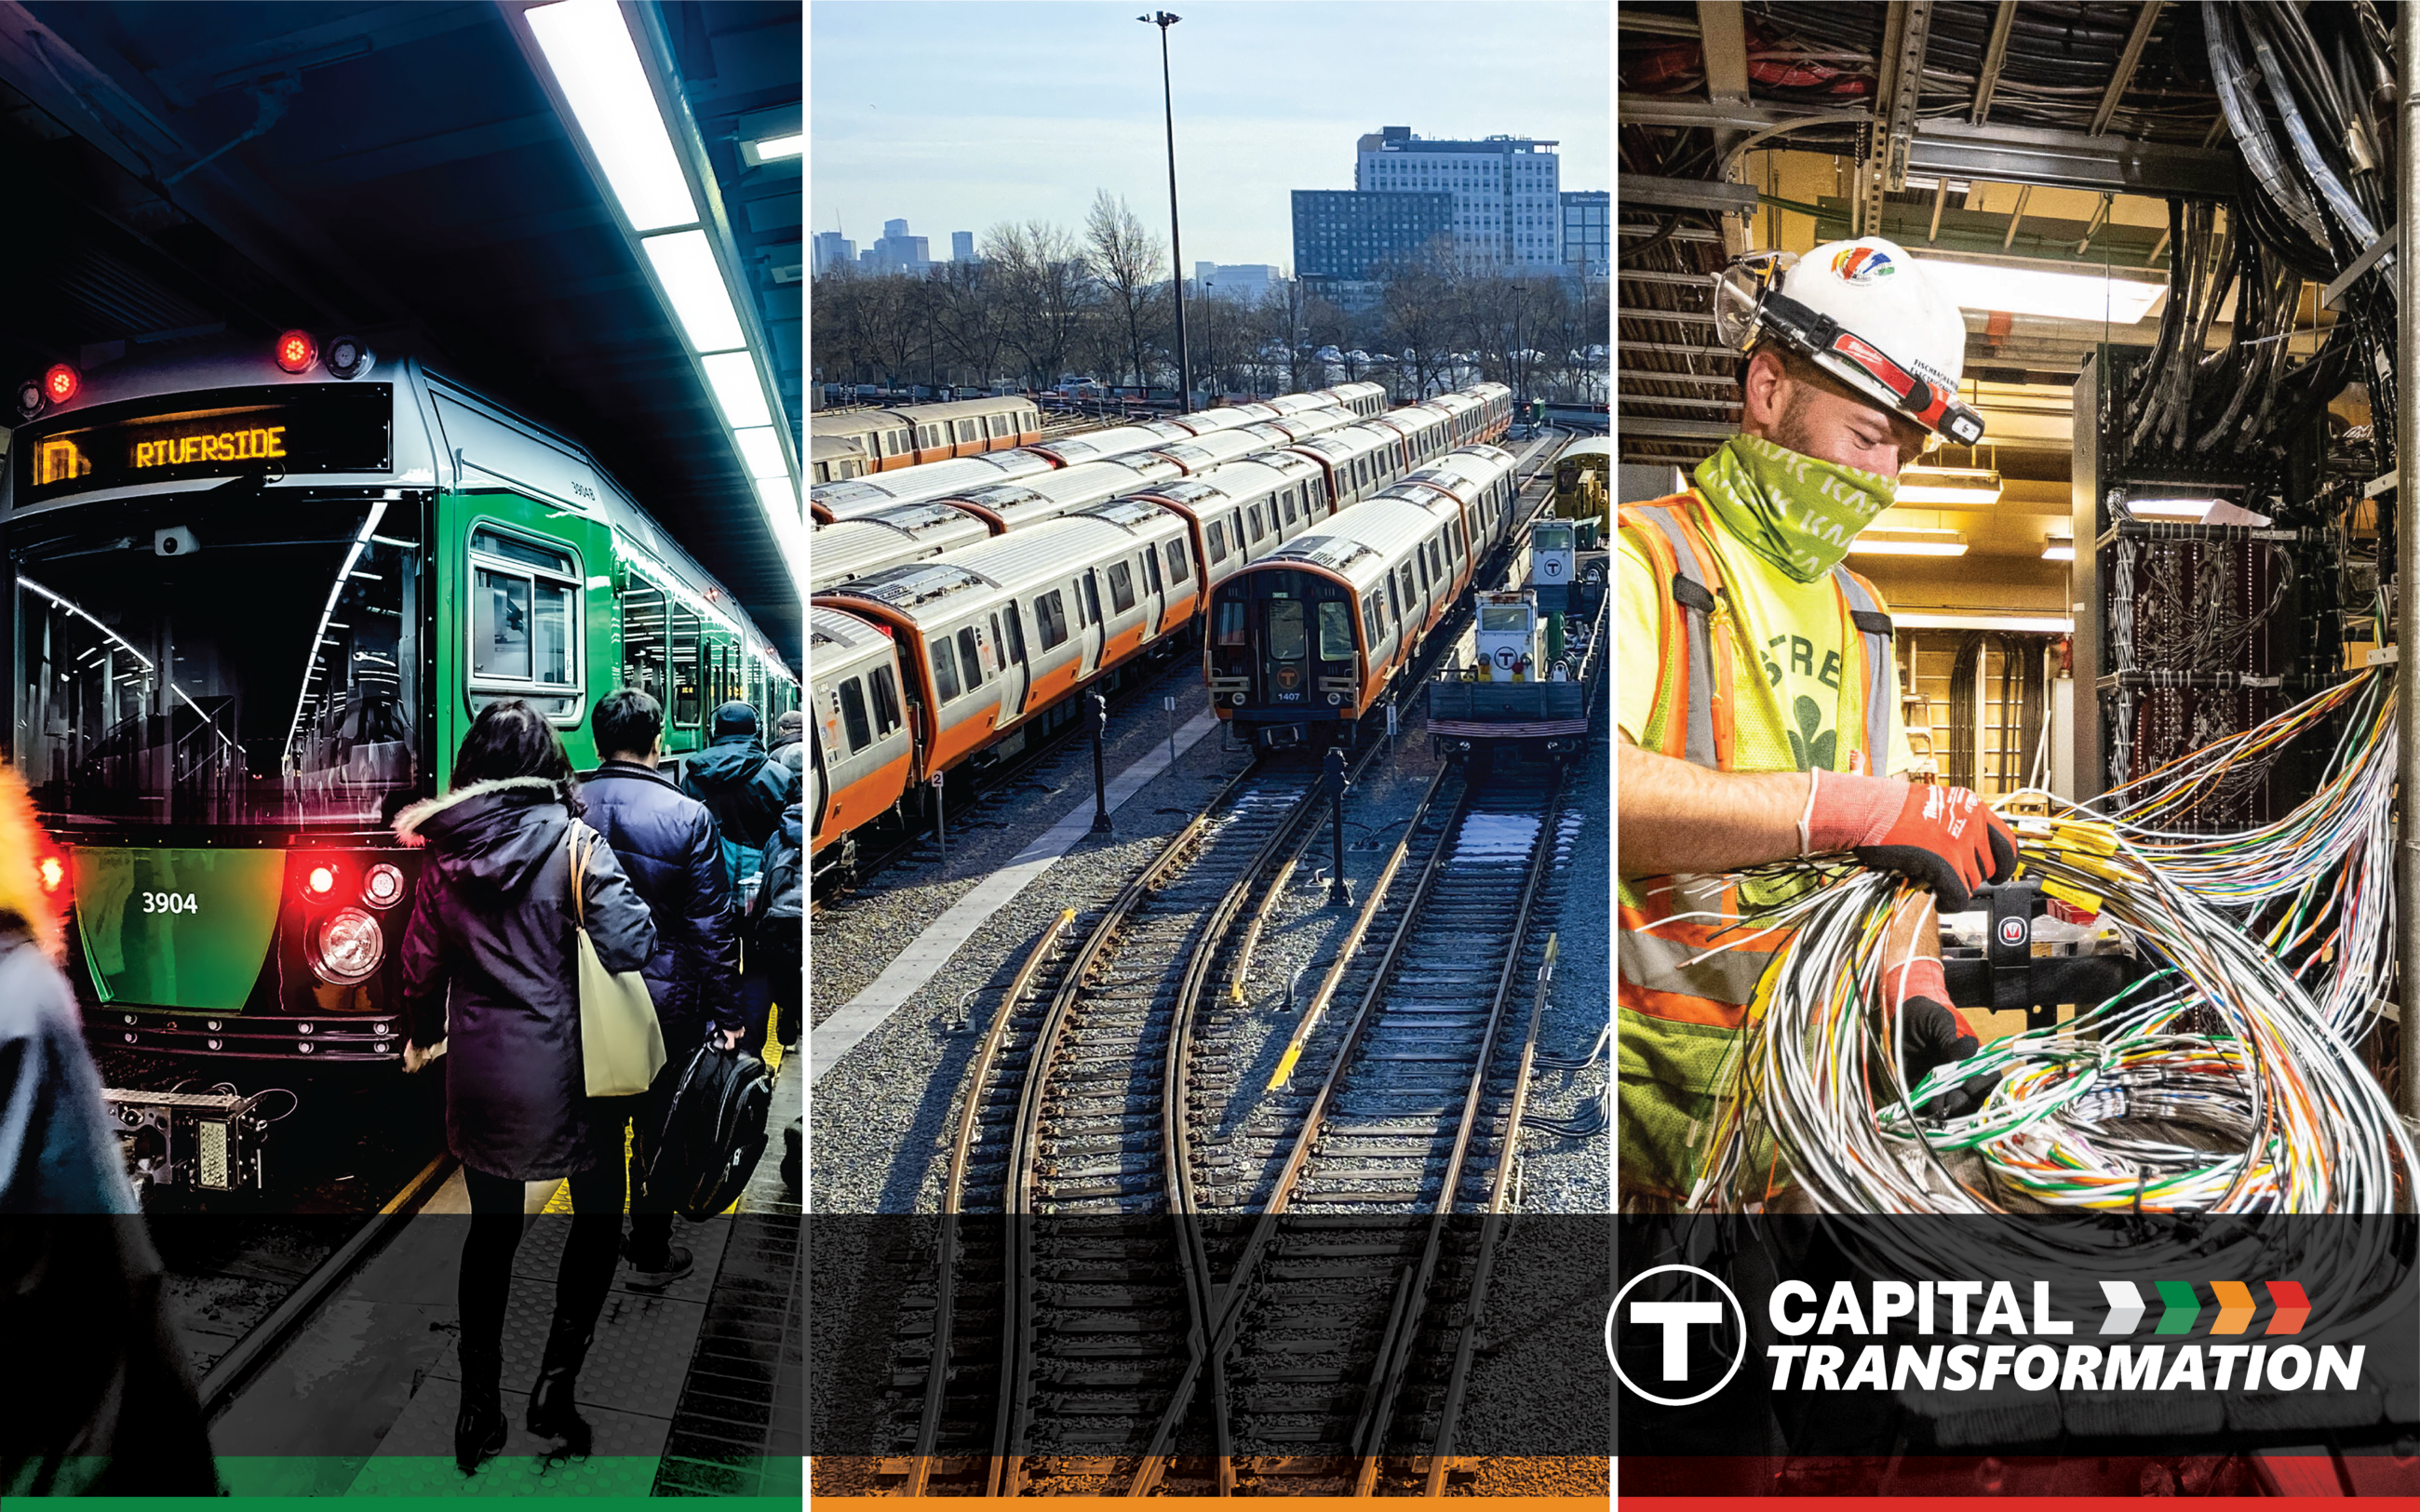 Three photos side by side: a green line train, a train yard full of orange line trains, and a crew member in a hard hat and high visibility vest holding wiring in a signal building. The T logo appears next to "Capital Transformation a division of capital programs" at the bottom